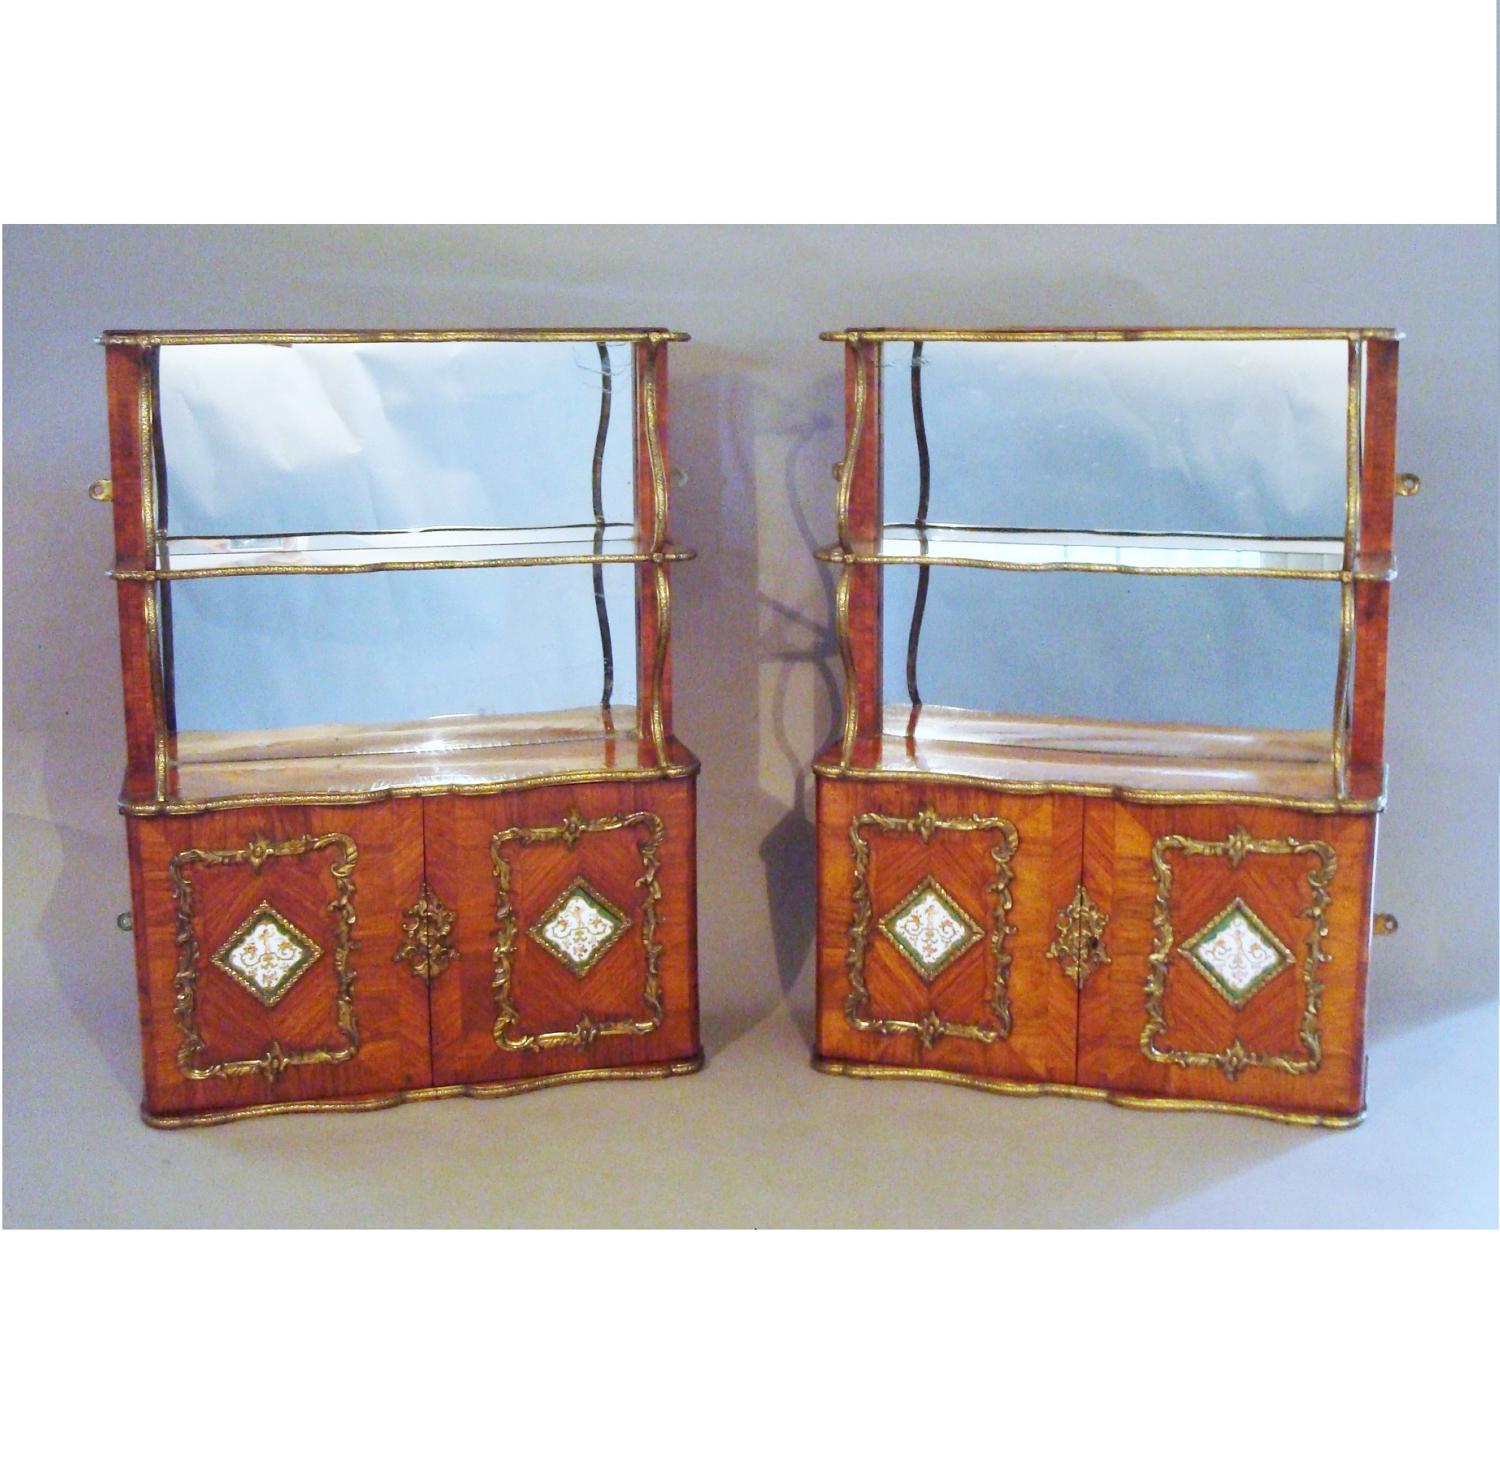 19th century pair of English hanging wall cabinets